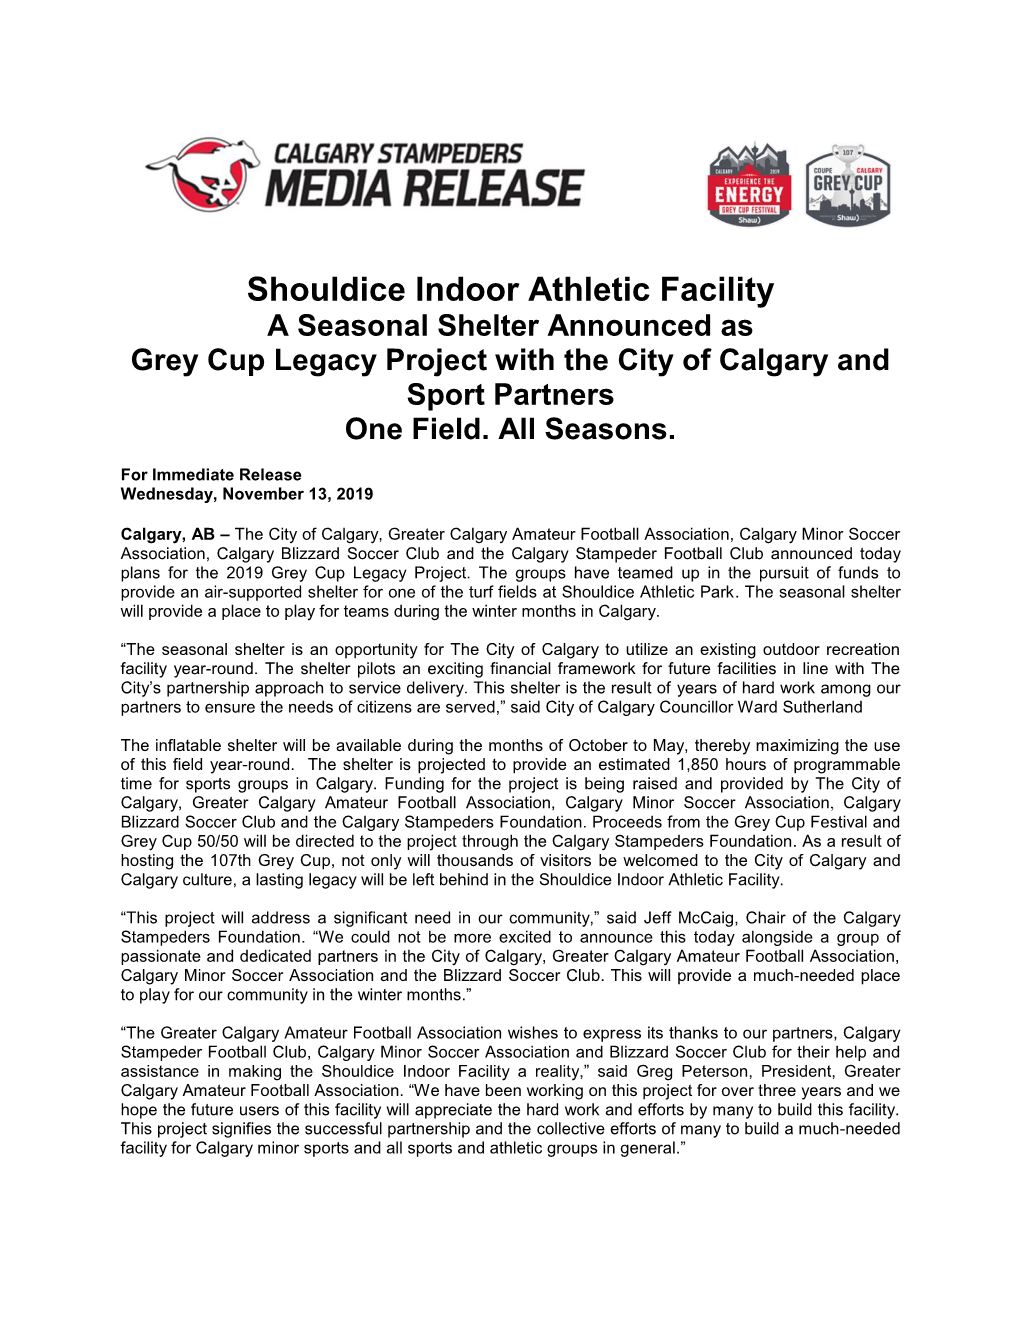 Shouldice Indoor Athletic Facility a Seasonal Shelter Announced As Grey Cup Legacy Project with the City of Calgary and Sport Partners One Field